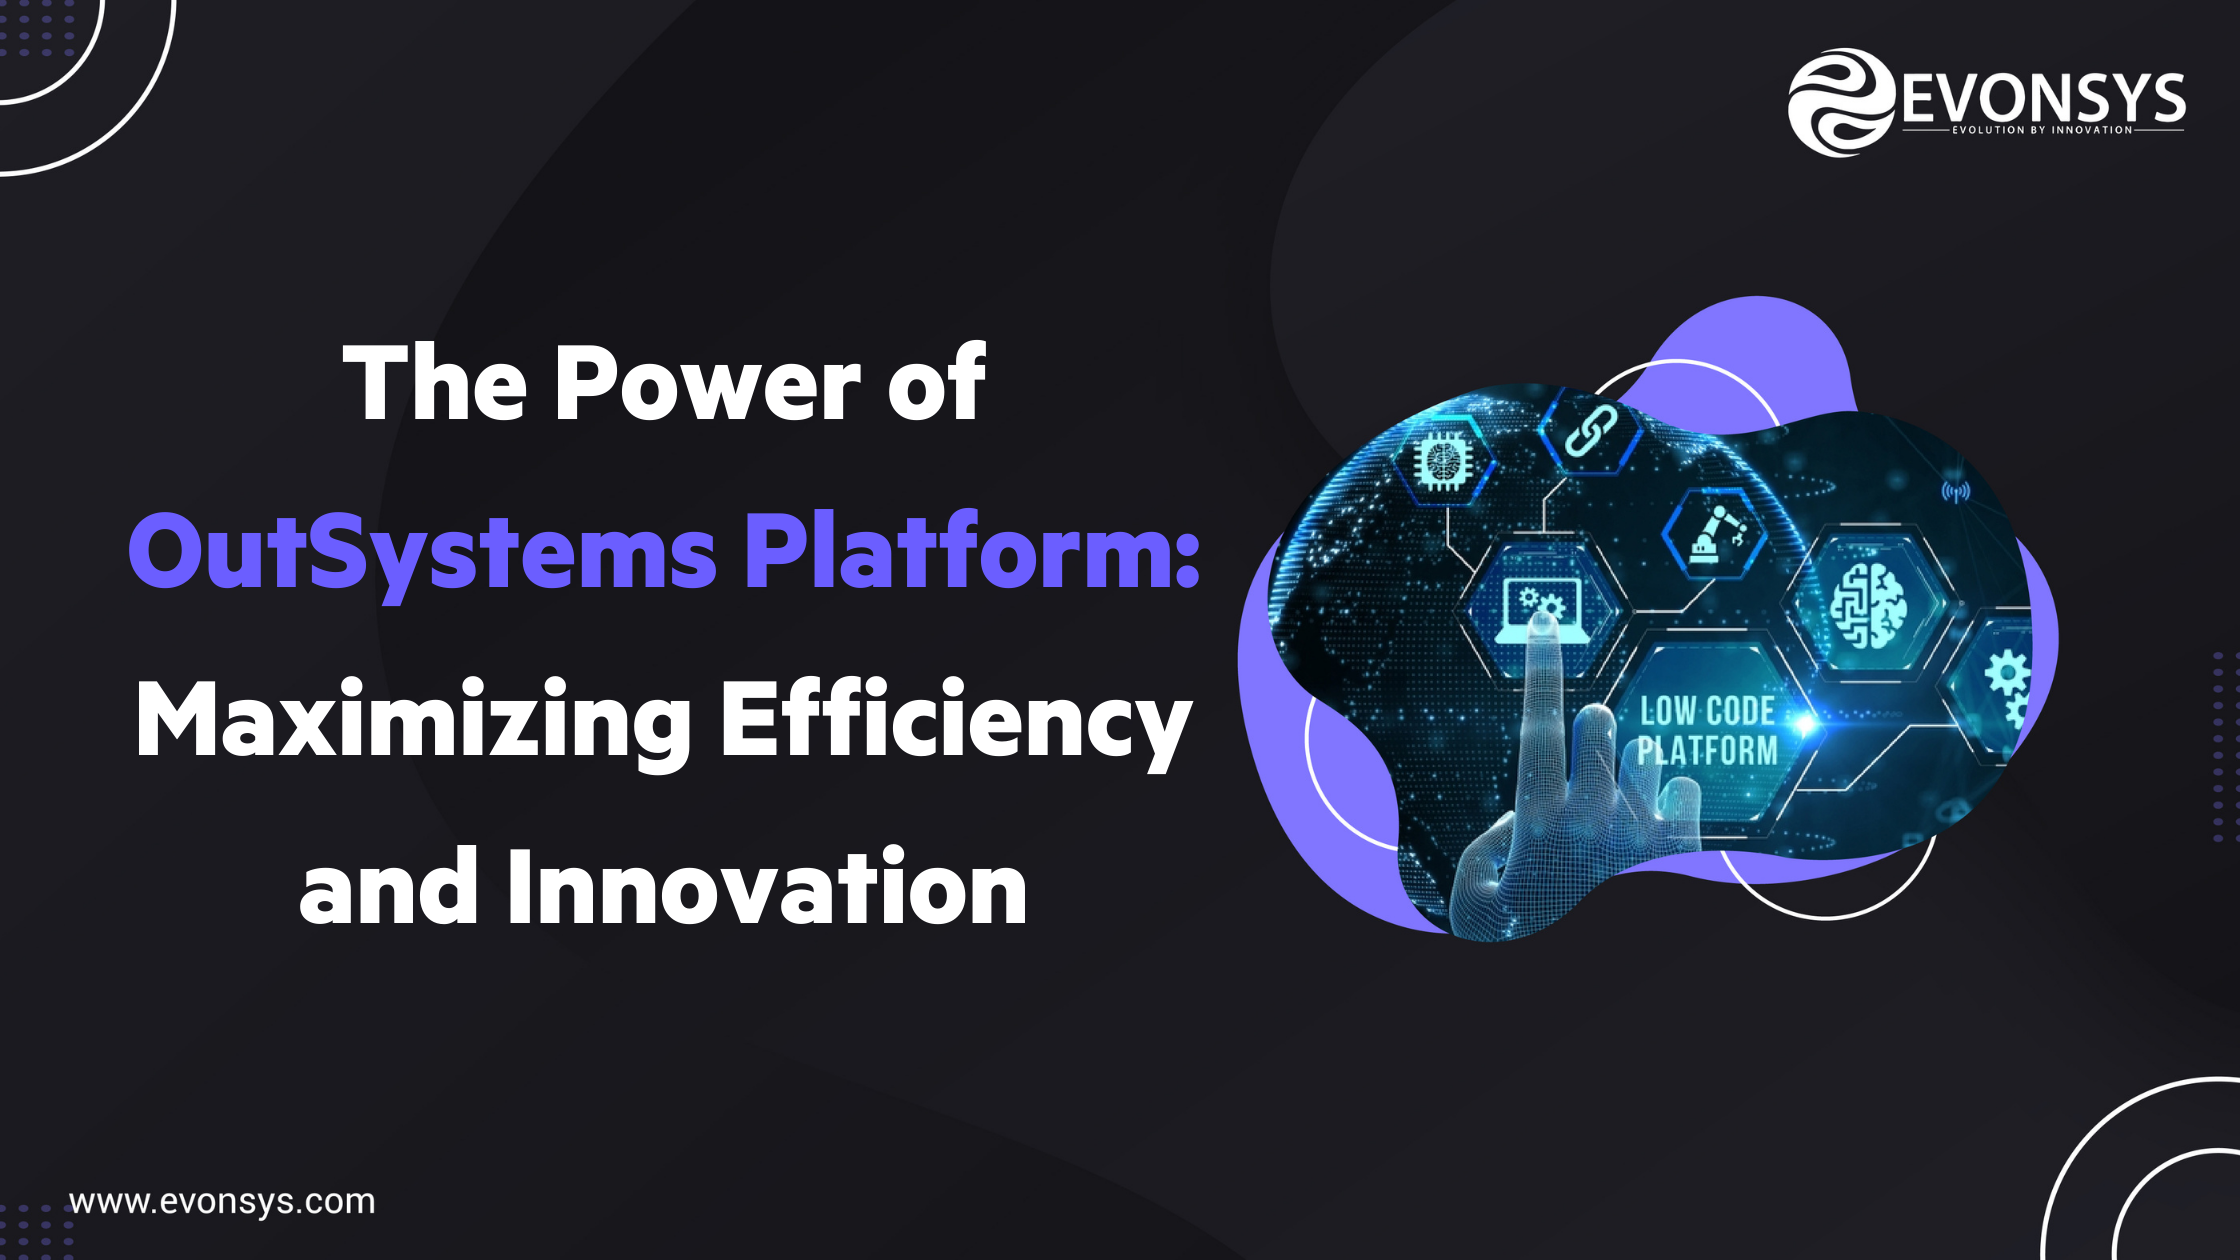 The Power of OutSystems Platform: Maximizing Efficiency and Innovation